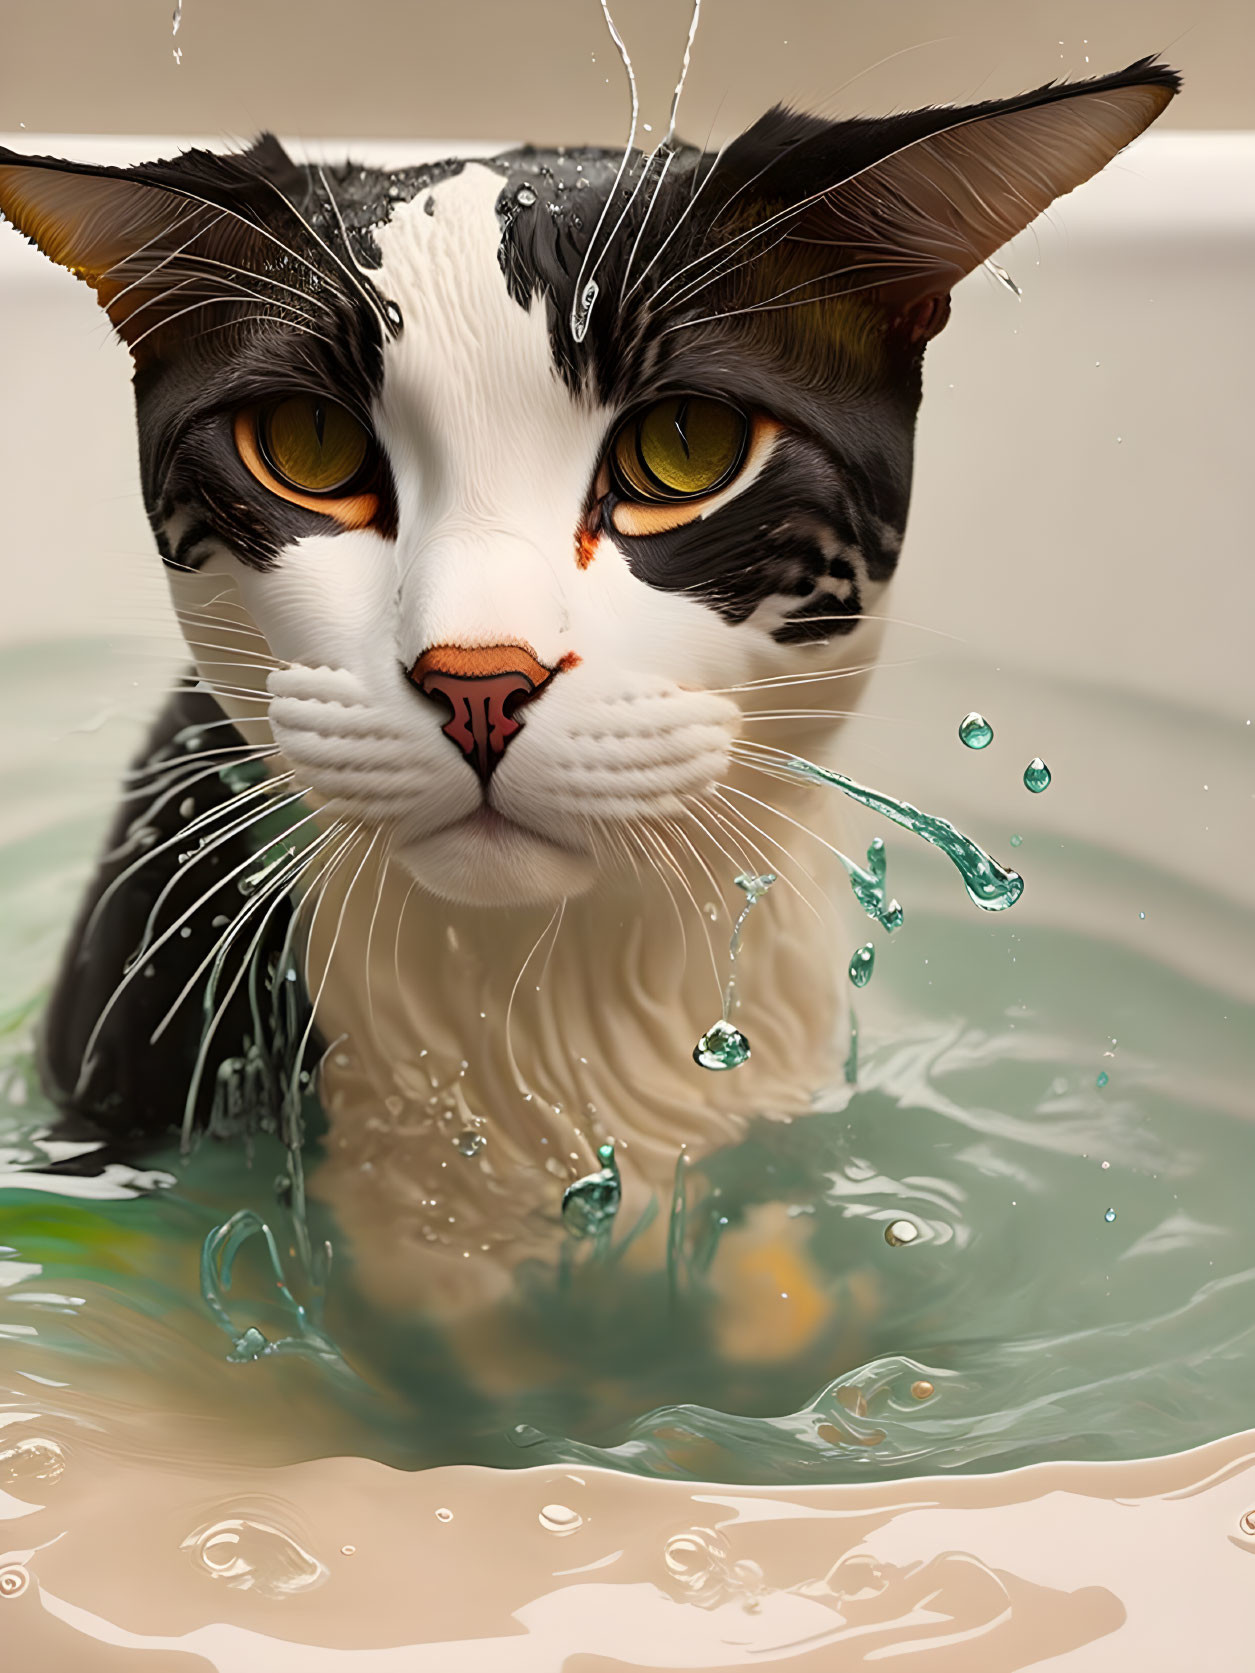 Black and White Cat with Amber Eyes Submerged in Water